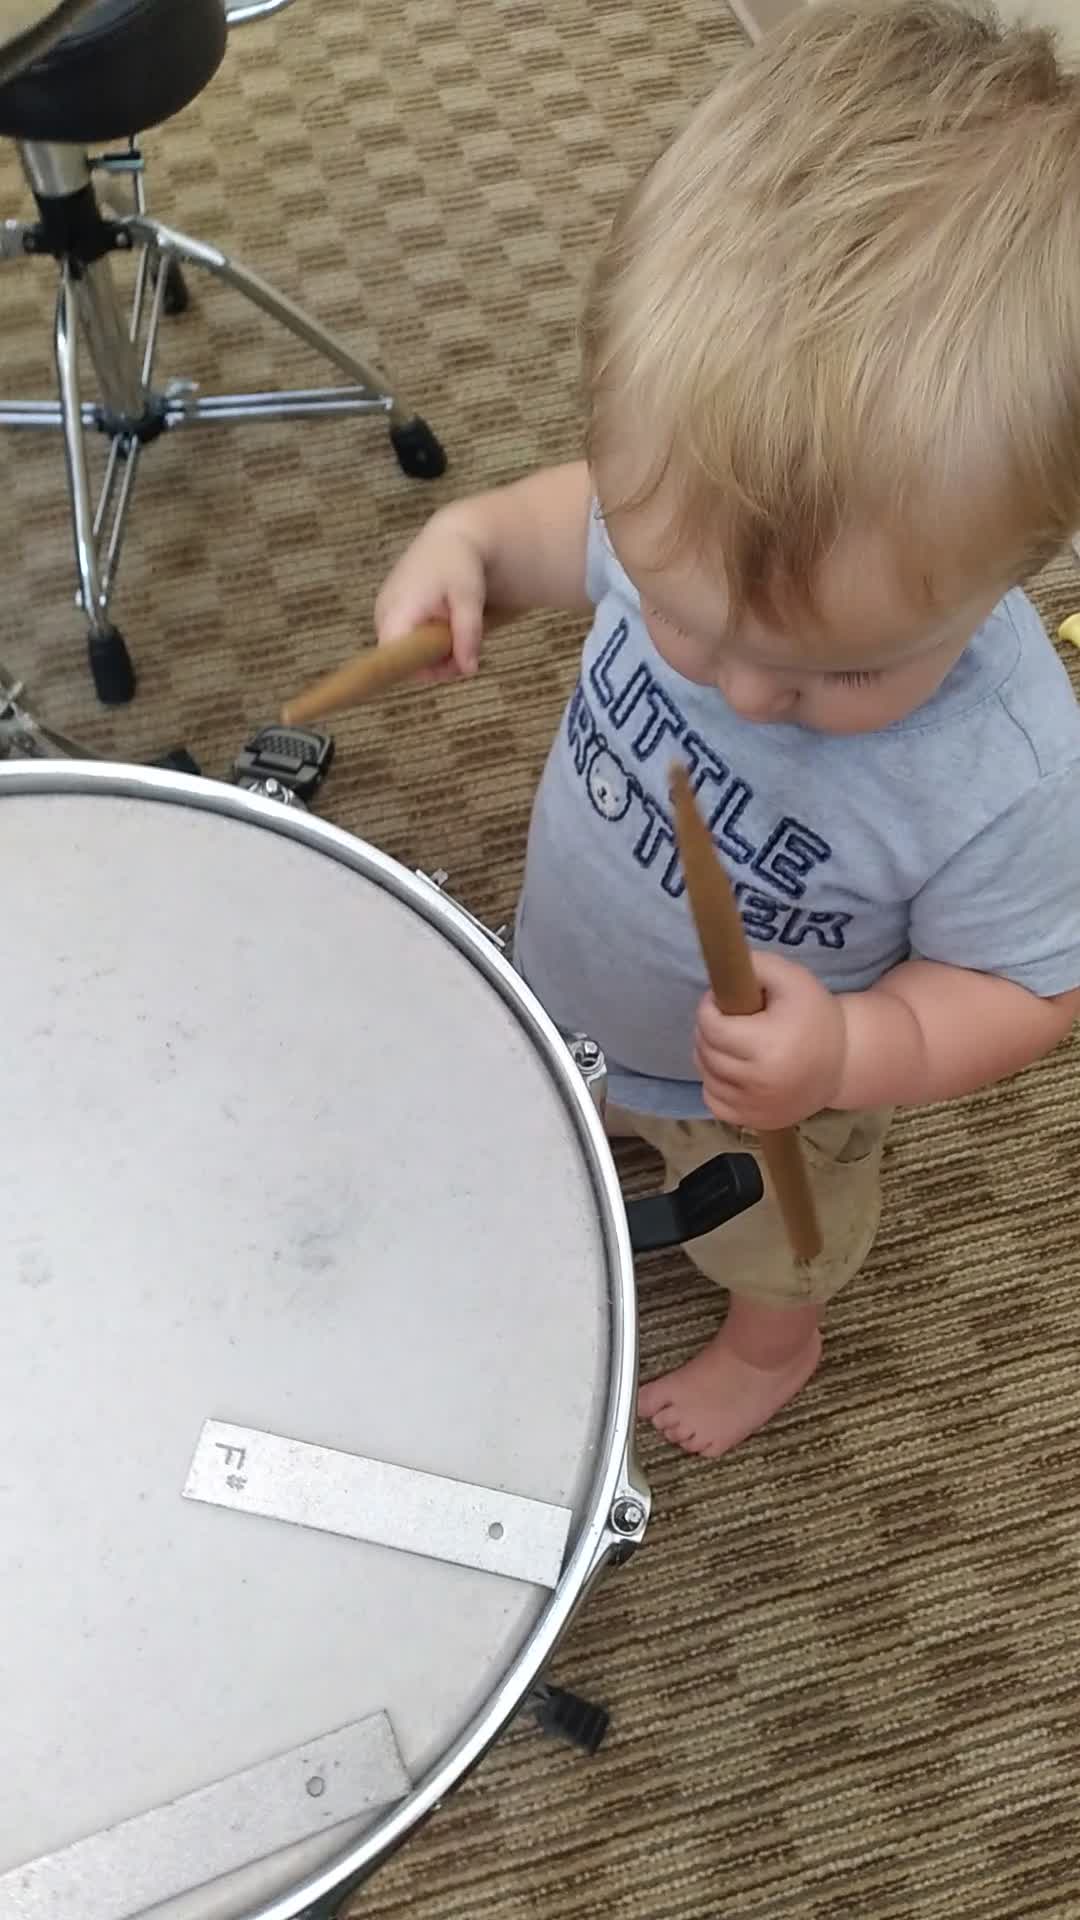 The small drummer